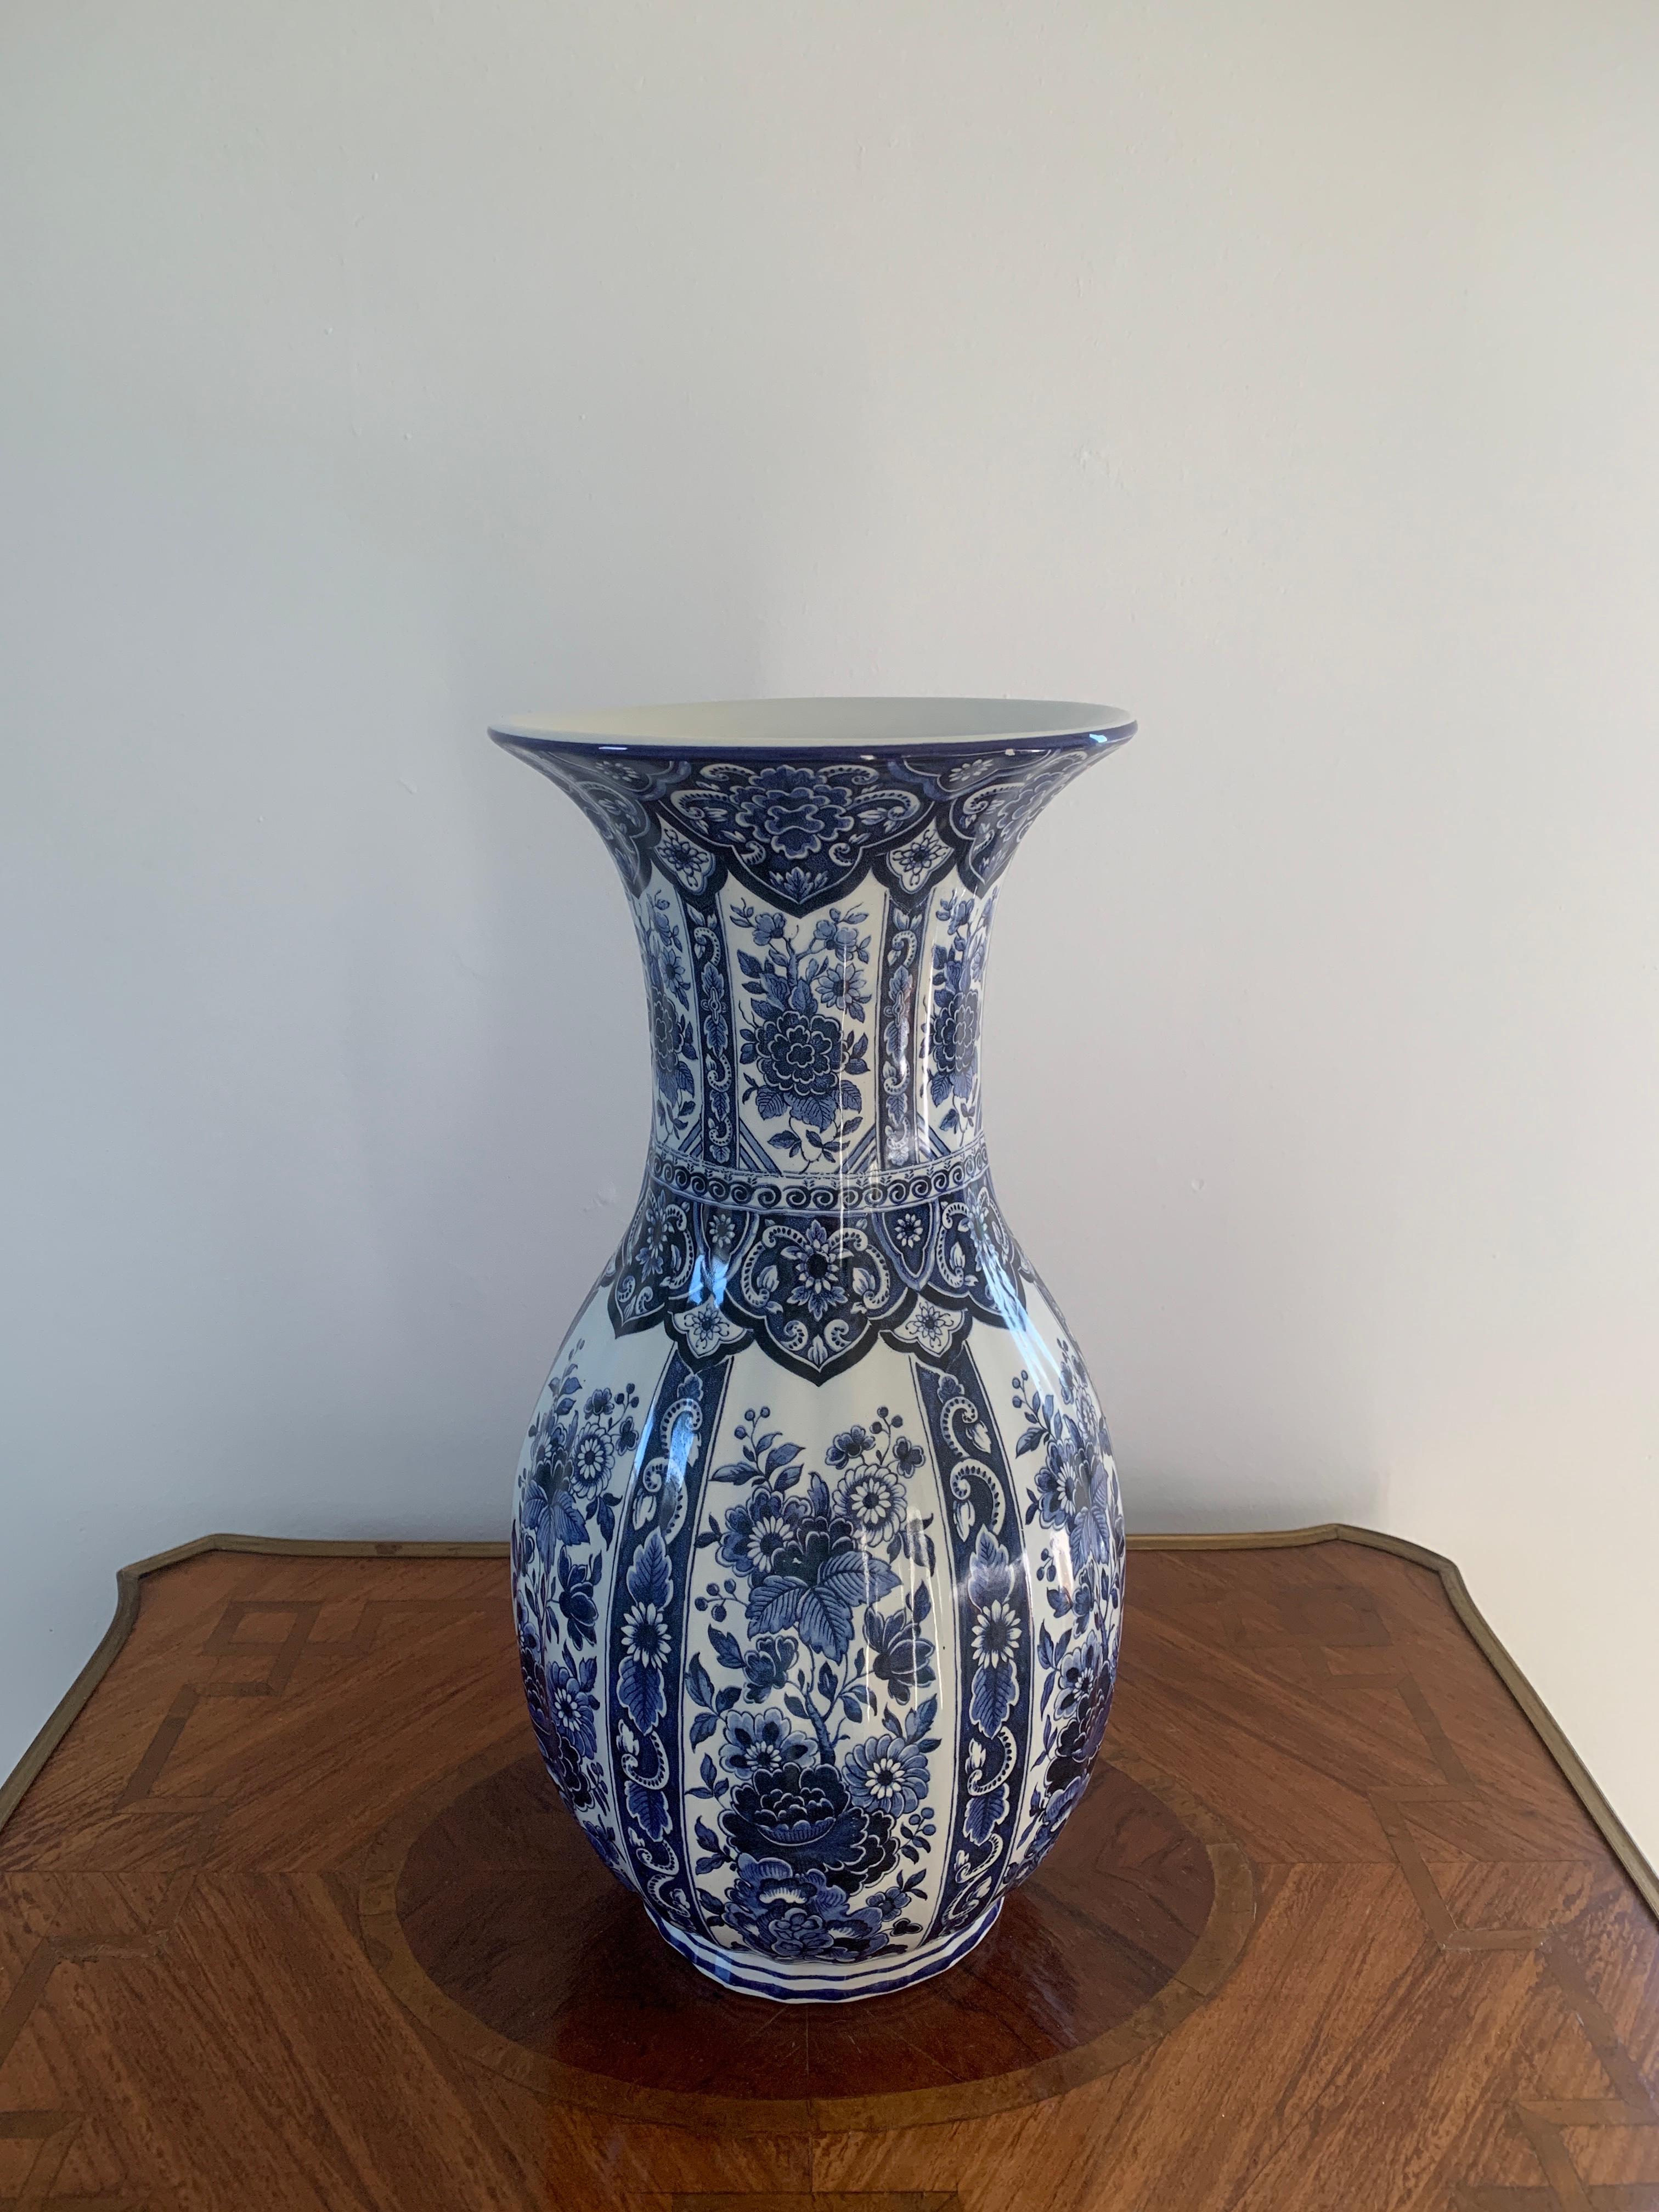 A beautiful mid-20th century Italian blue and white porcelain vase made by Ardalt Blue Delfia.